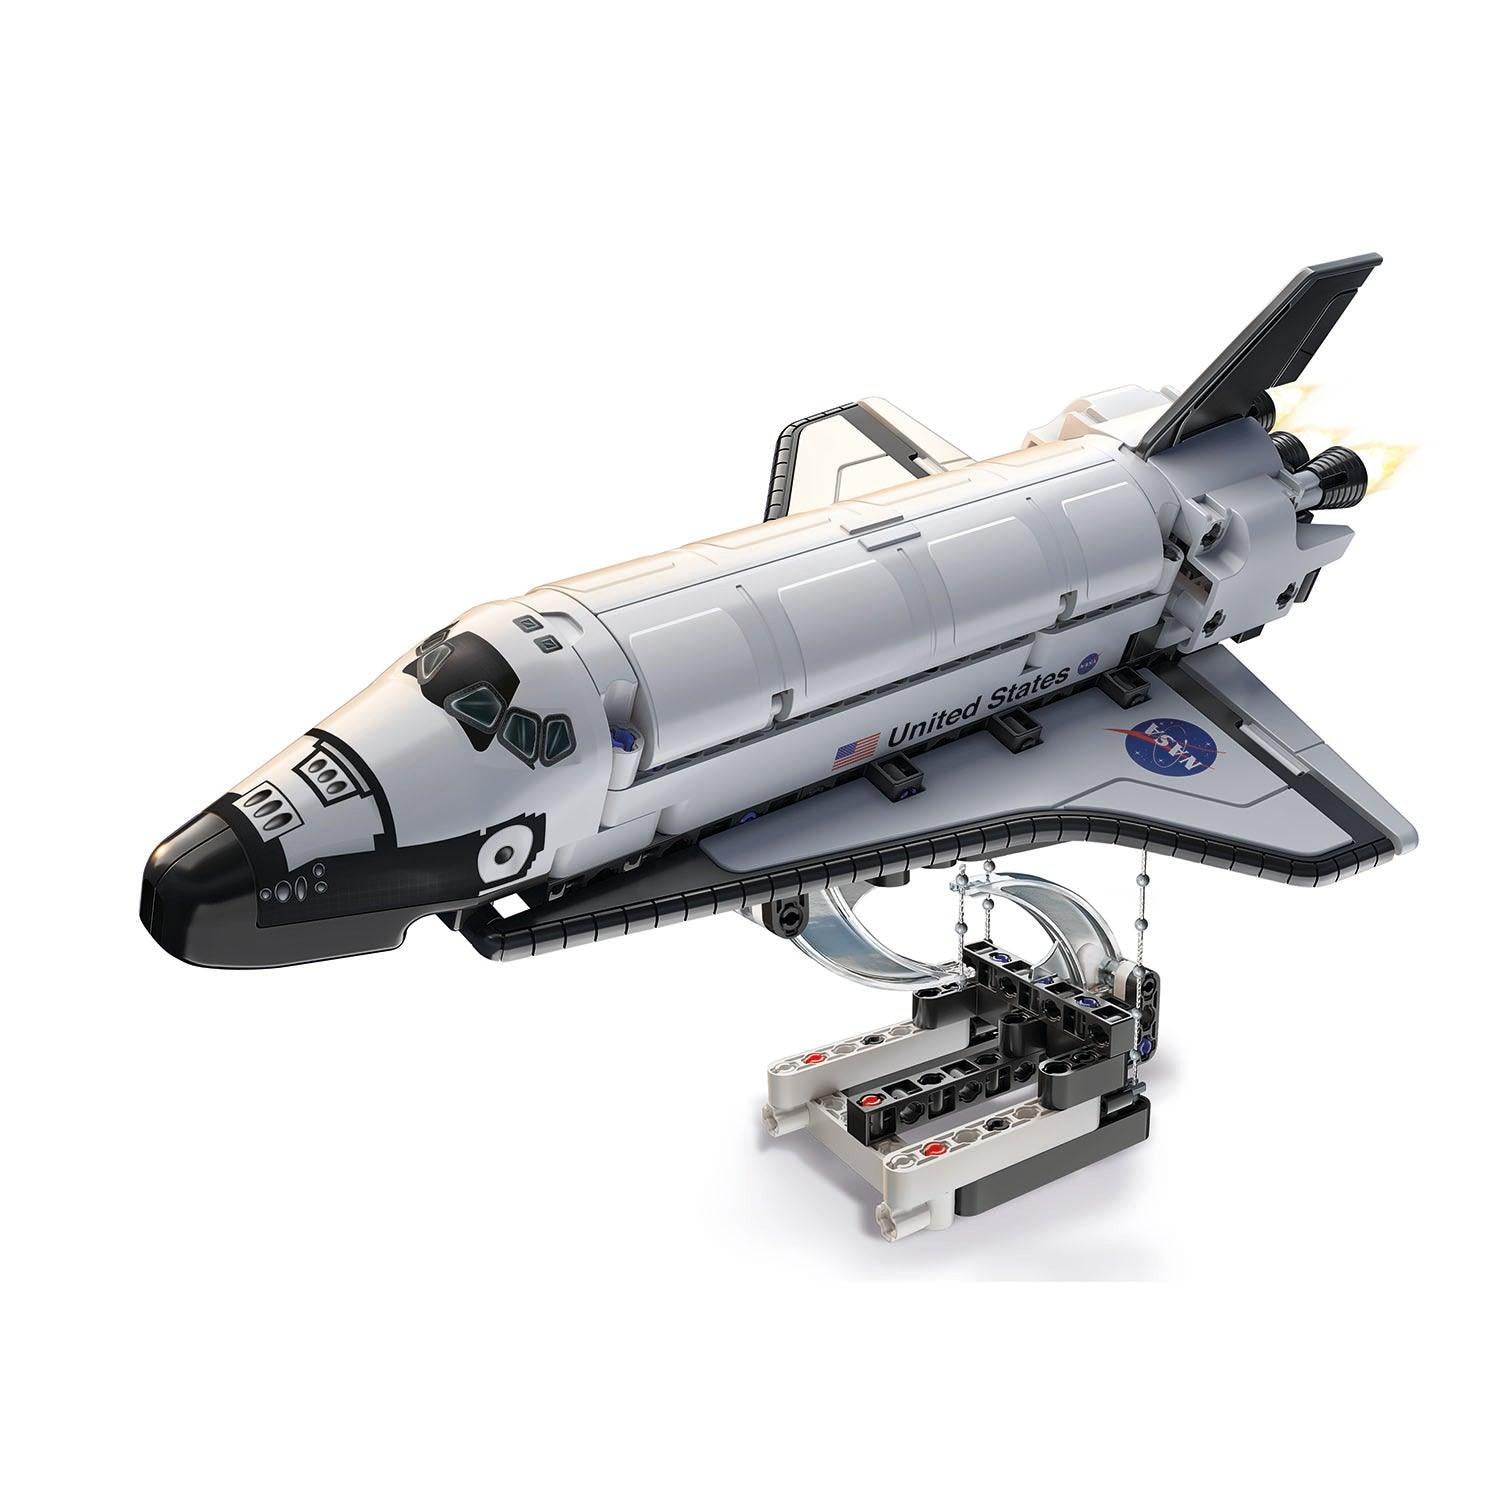 NASA Floating Space Shuttle - Kits - Science Museum Shop